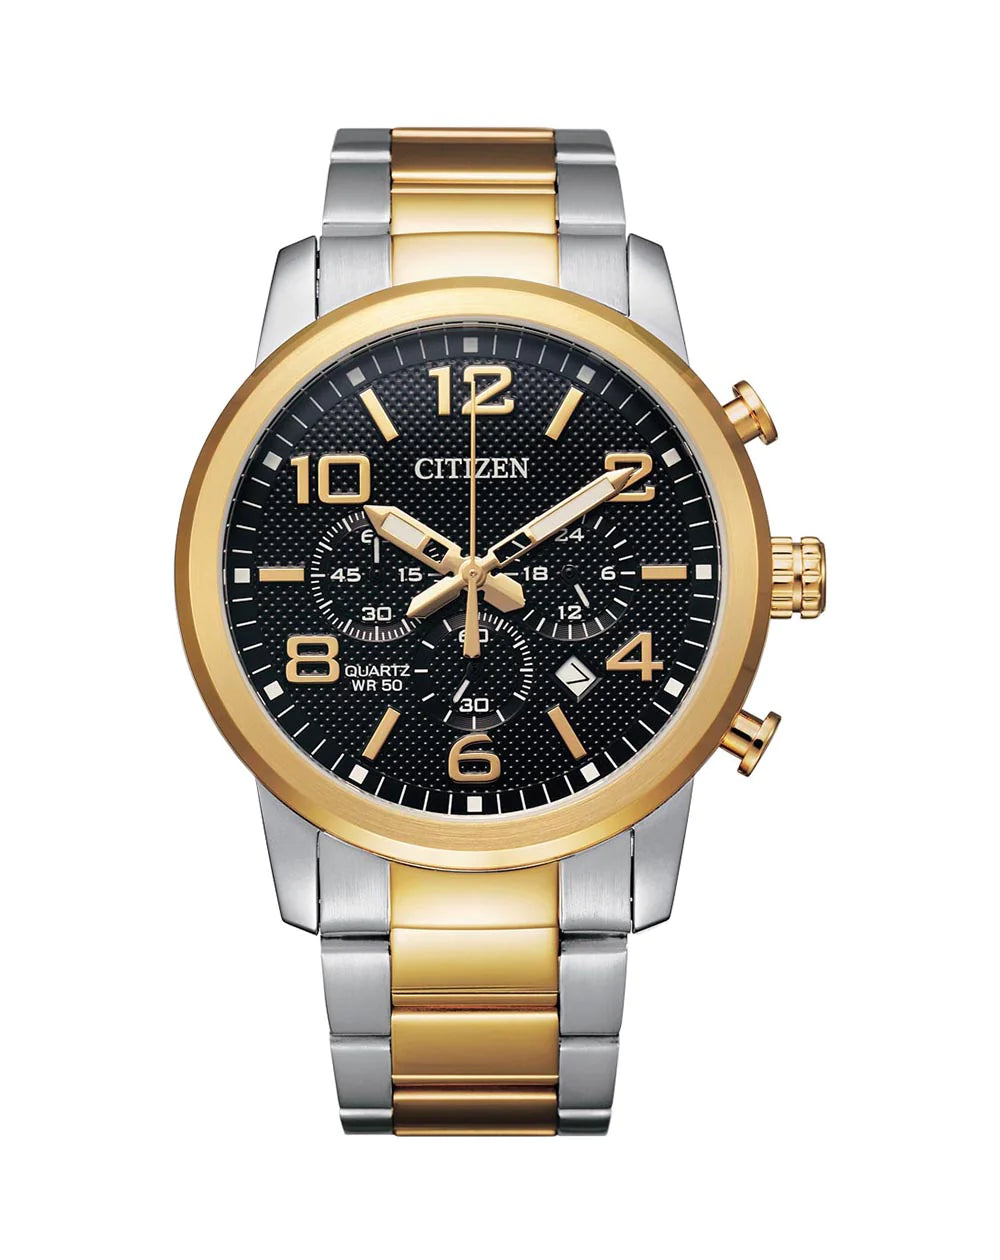 Gents two-tine Chronograph Watch Citizen